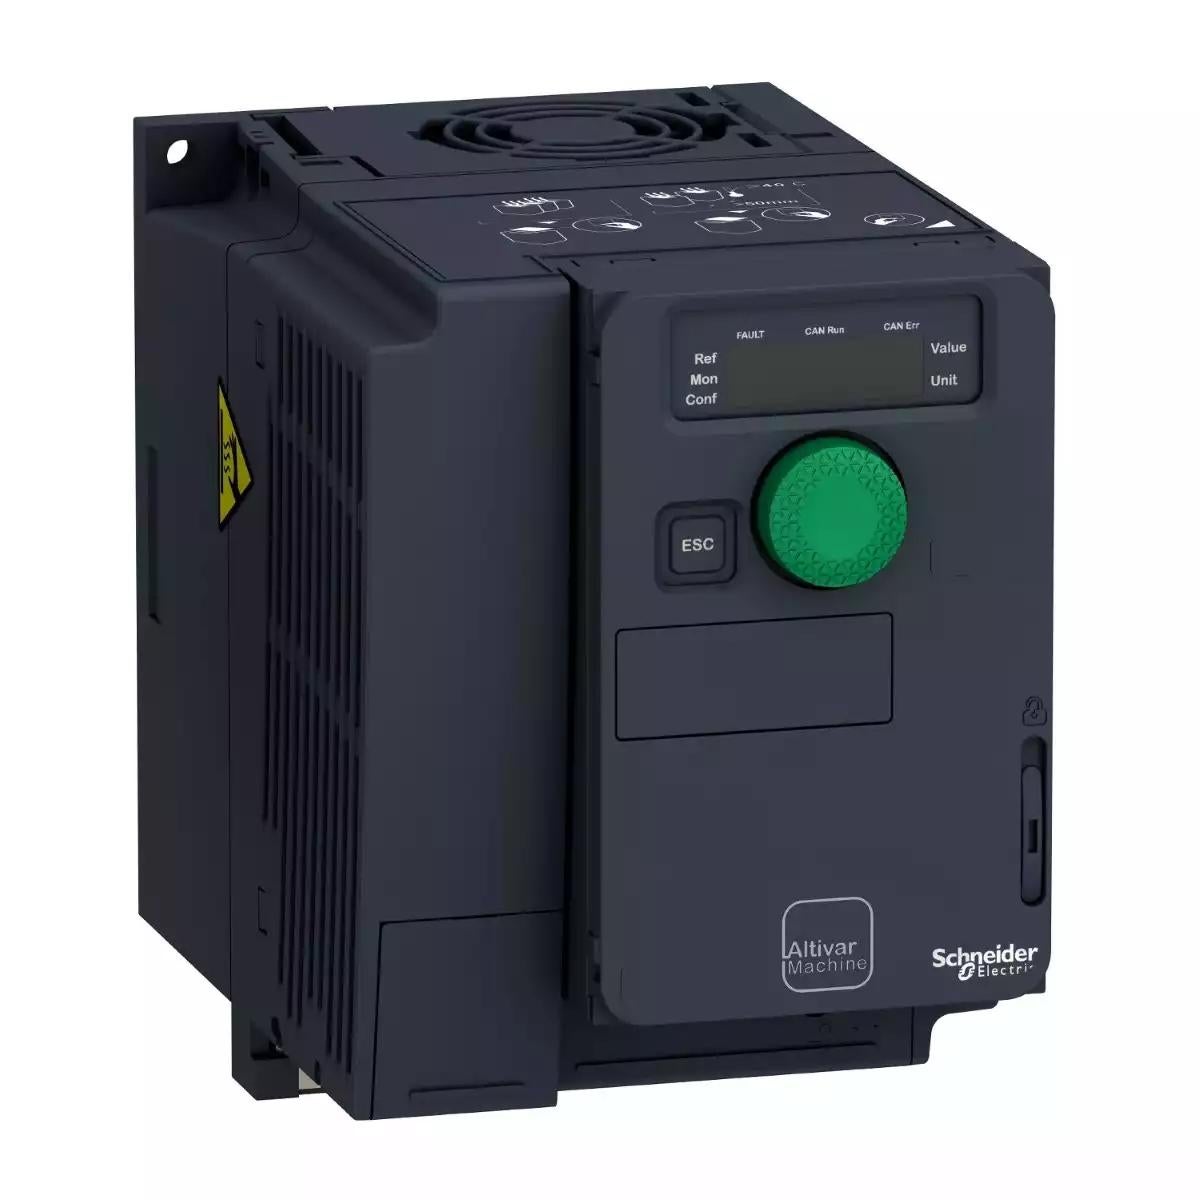 Schneider Electric Altivar 320 variable speed drive, ATV320, 0.37 kW, 380â€¦500 V, 3 phases, compact